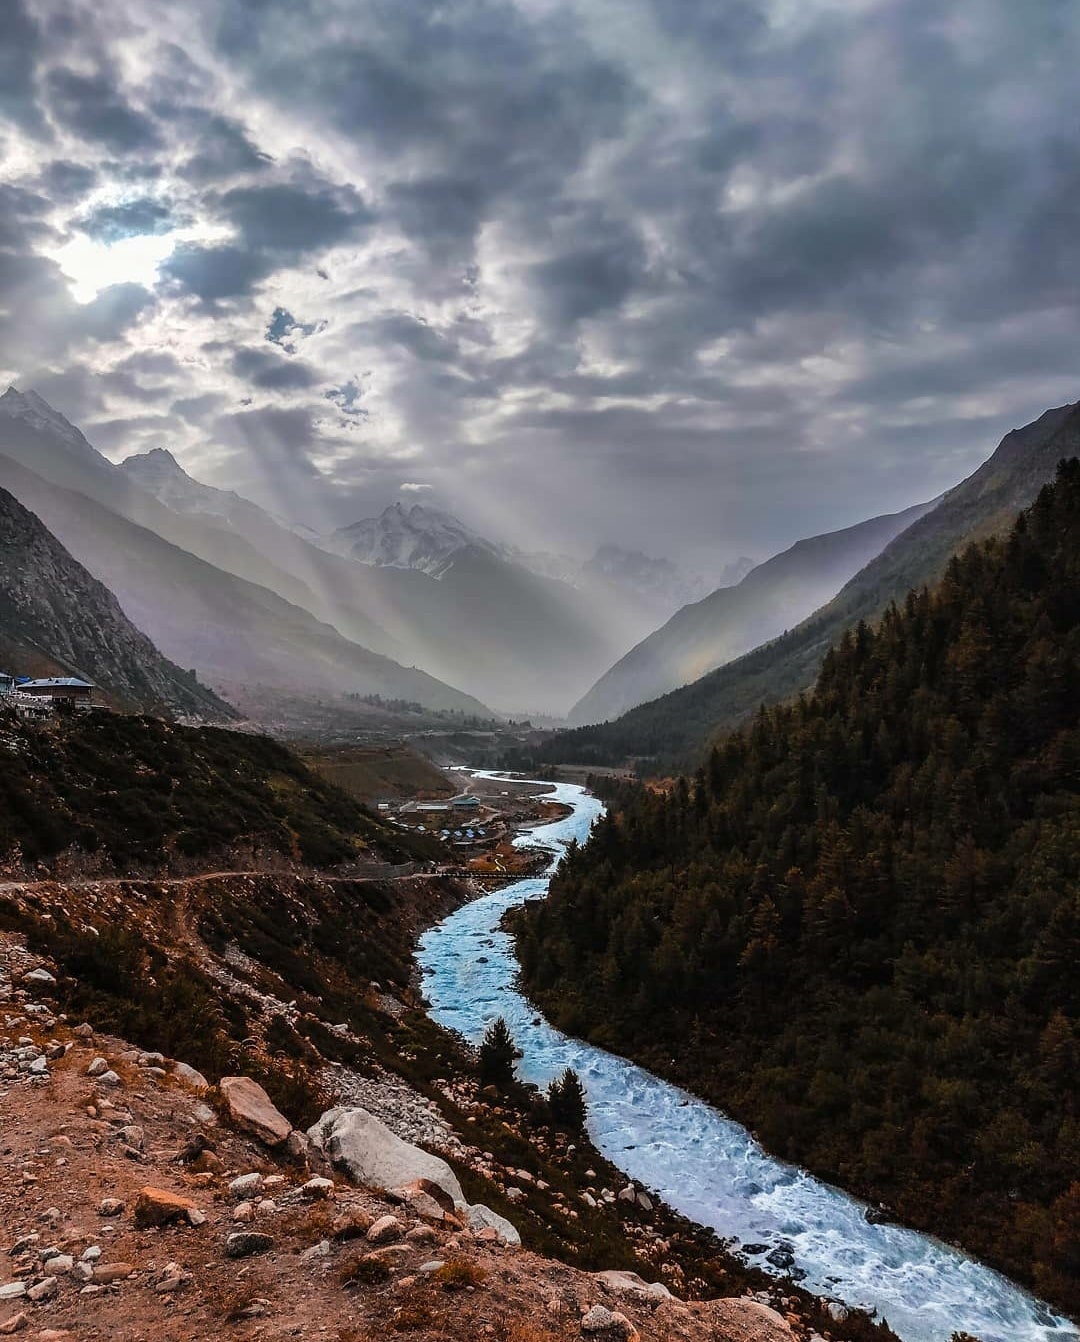 Chitkul aka ‘The Last Village Of India’. Hands down the most beautiful gem that adorns the Sangla Valley & the Kinnaur District. The river cutting through the village is the Baspa & the land you see in the far distance is Tibet. The picture was taken at 6 am as I took a morning walk to the river.